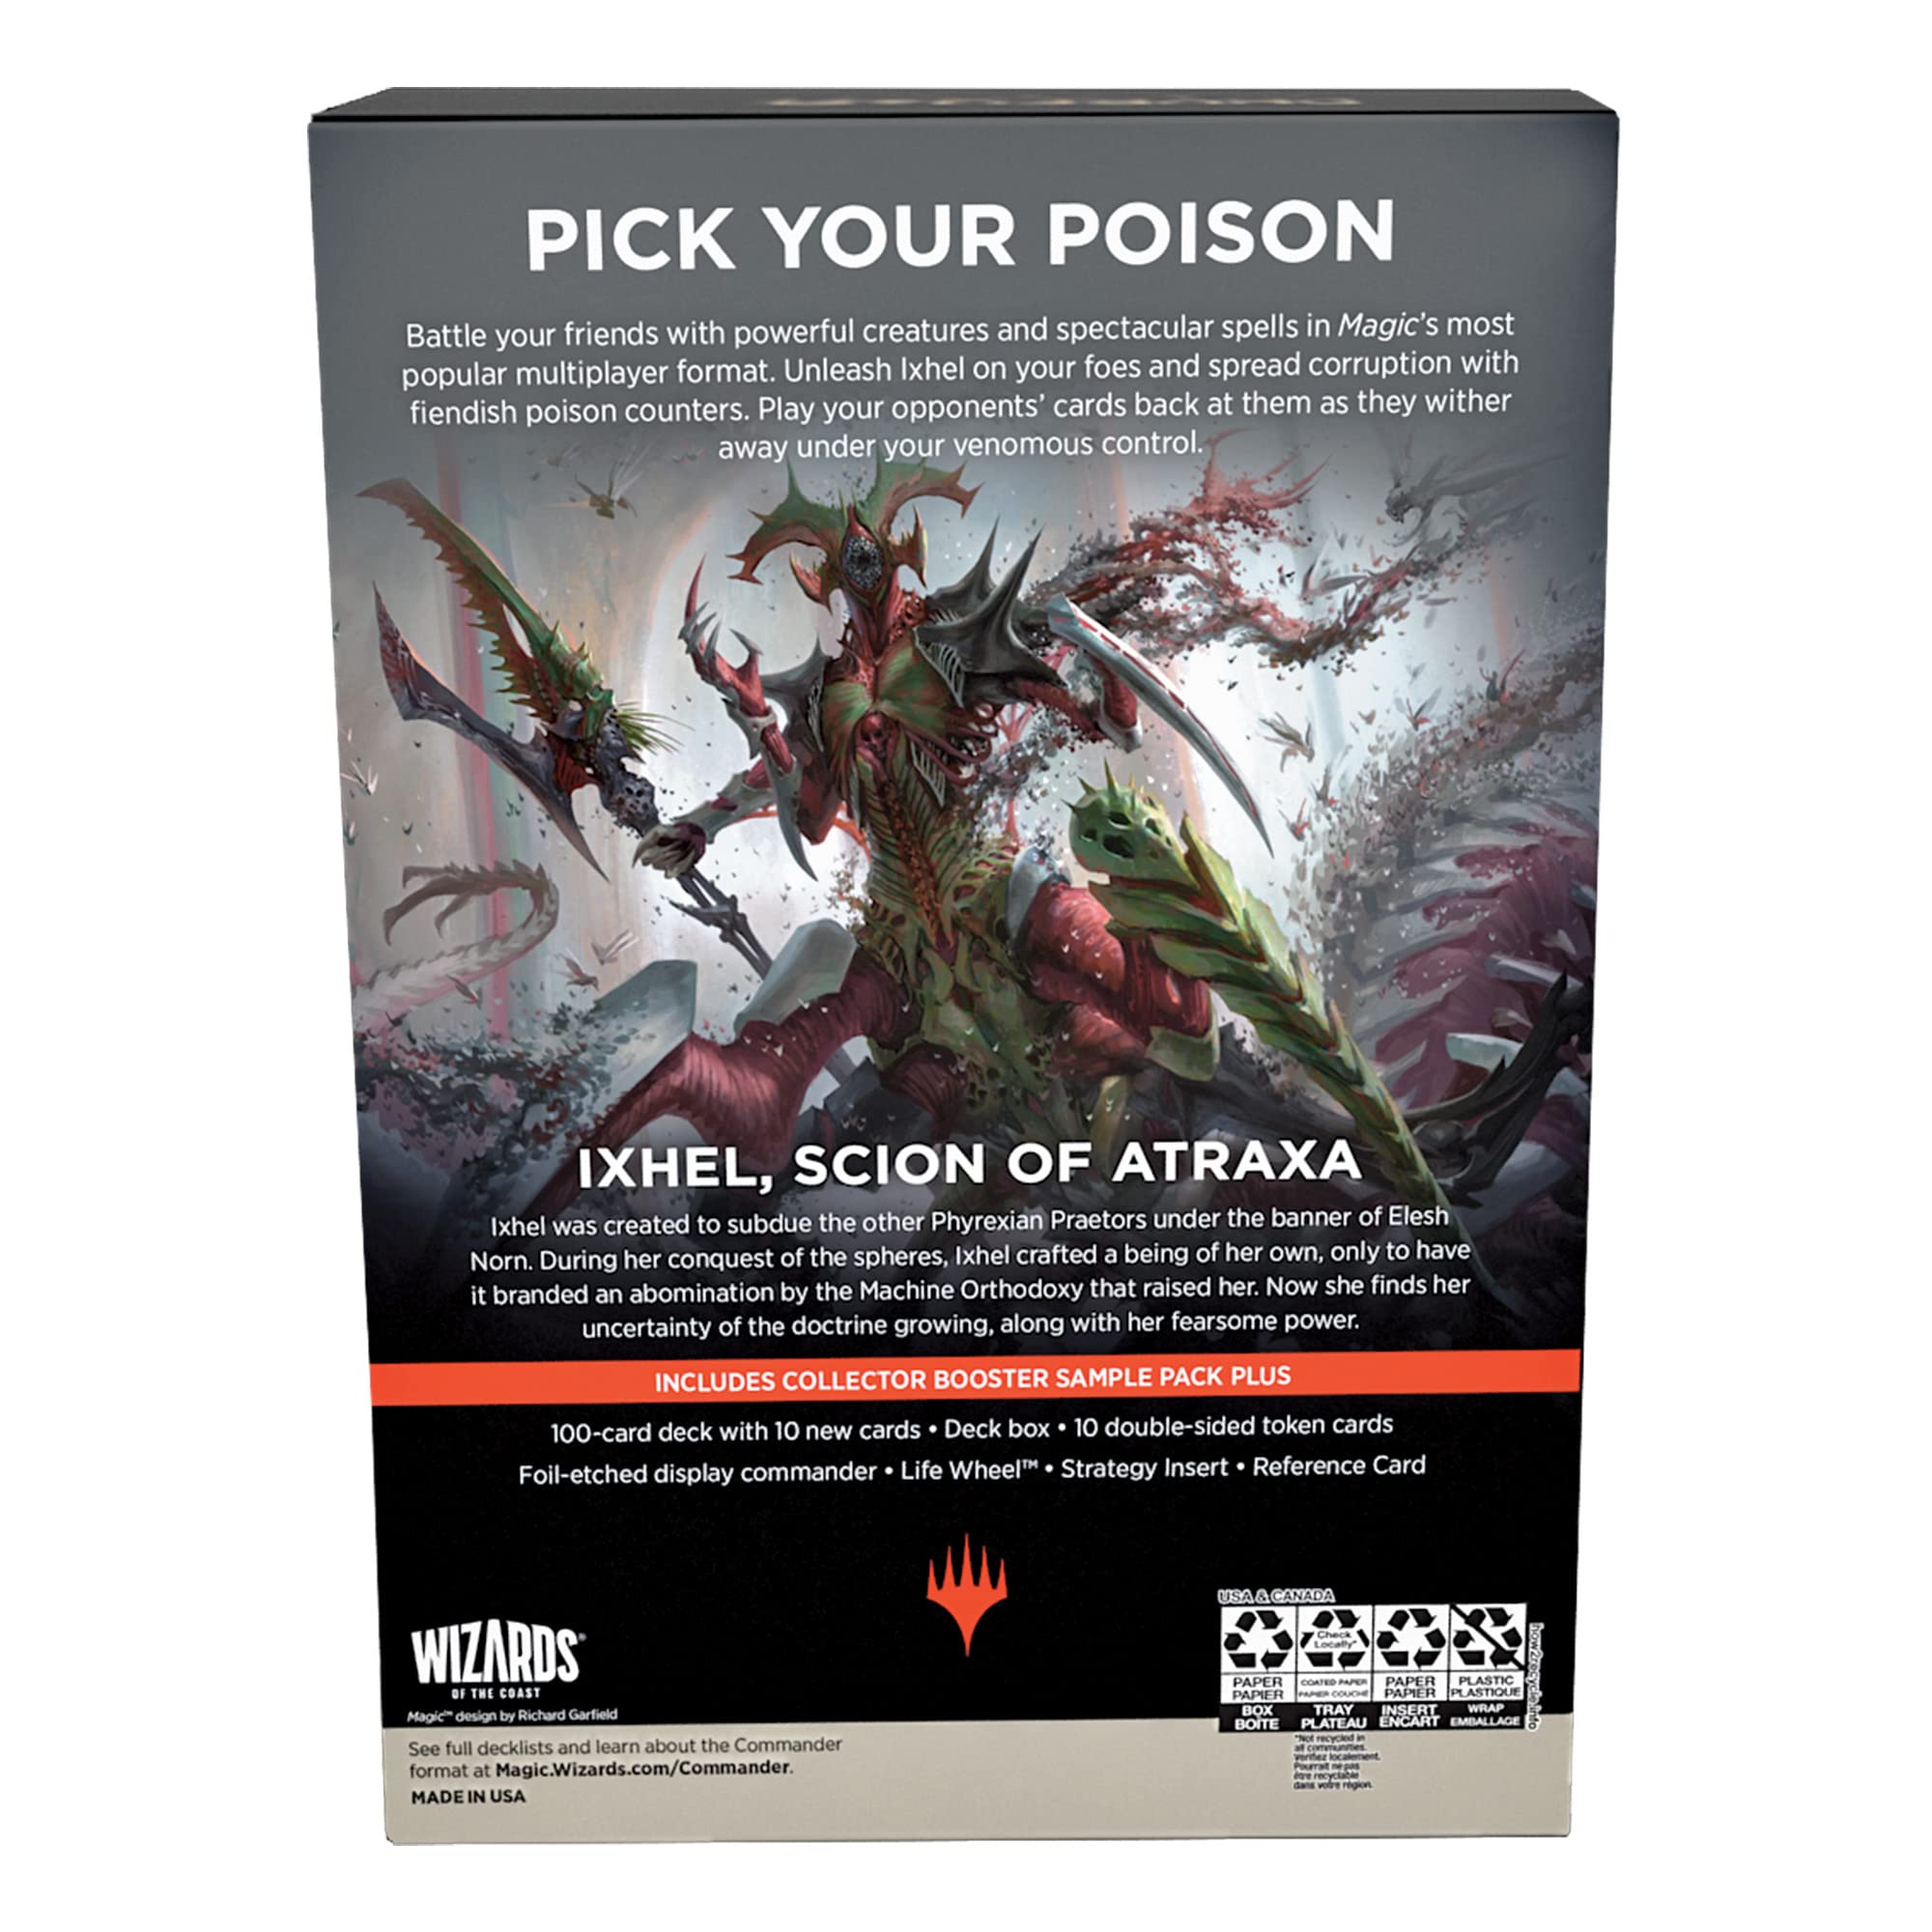 Magic: The Gathering Phyrexia: All Will Be One Commander Deck 1 + Collector Booster Sample Pack